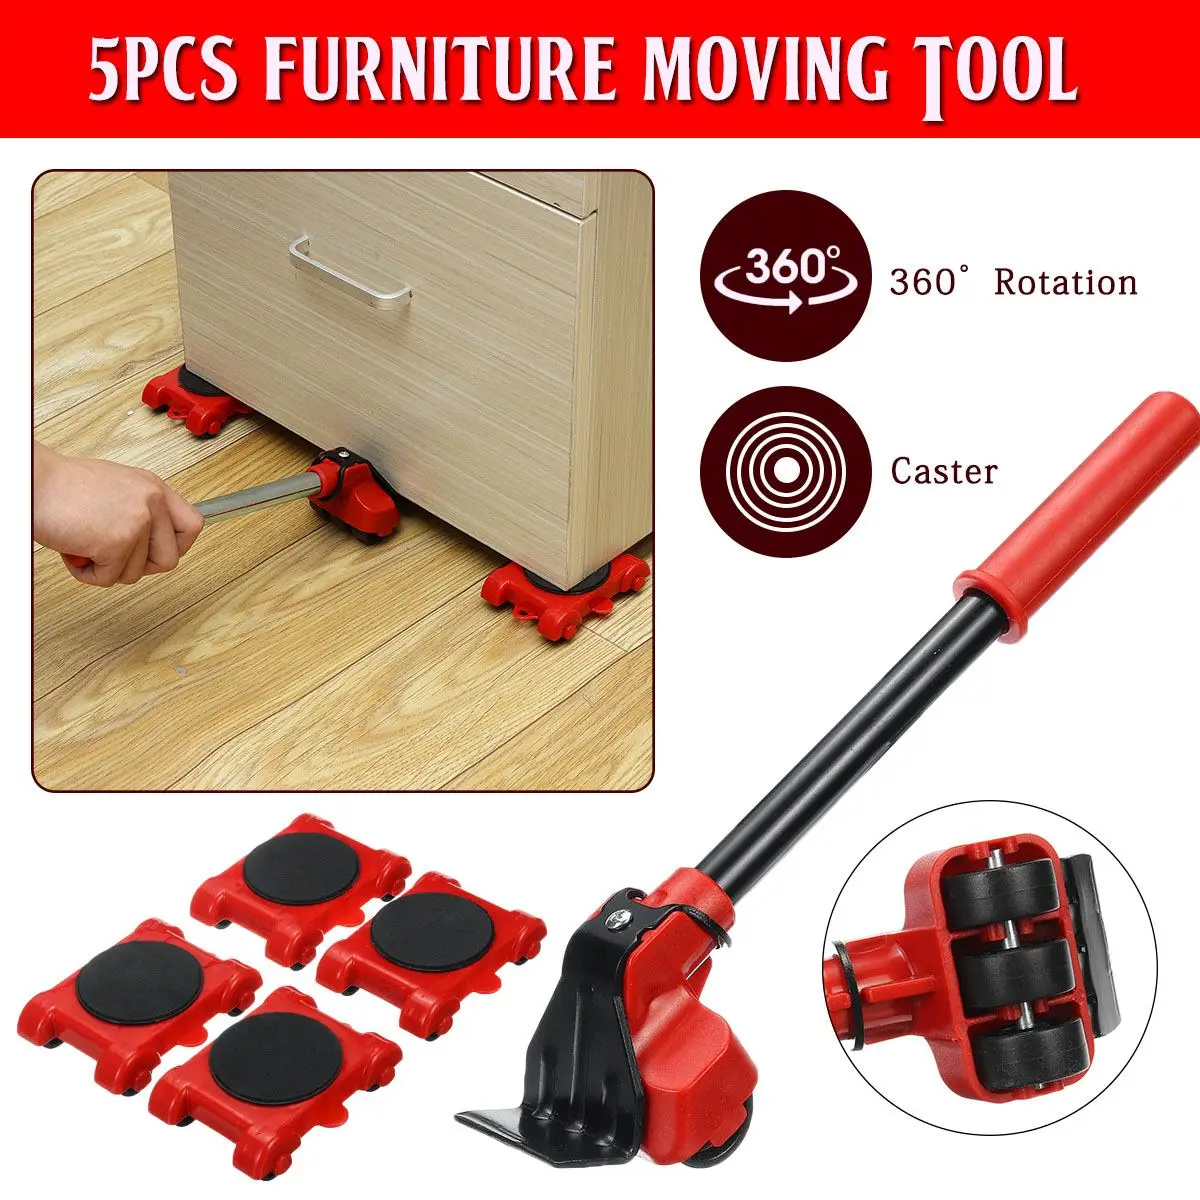 Youyijia Furniture Lifter Sliders 4Pcs Casters Kits 360 Degree Rotatable Adjustable Height Moving Lifting Tool Set for Heavy Duty Furniture Couches Refrigerators Washing Machine Red